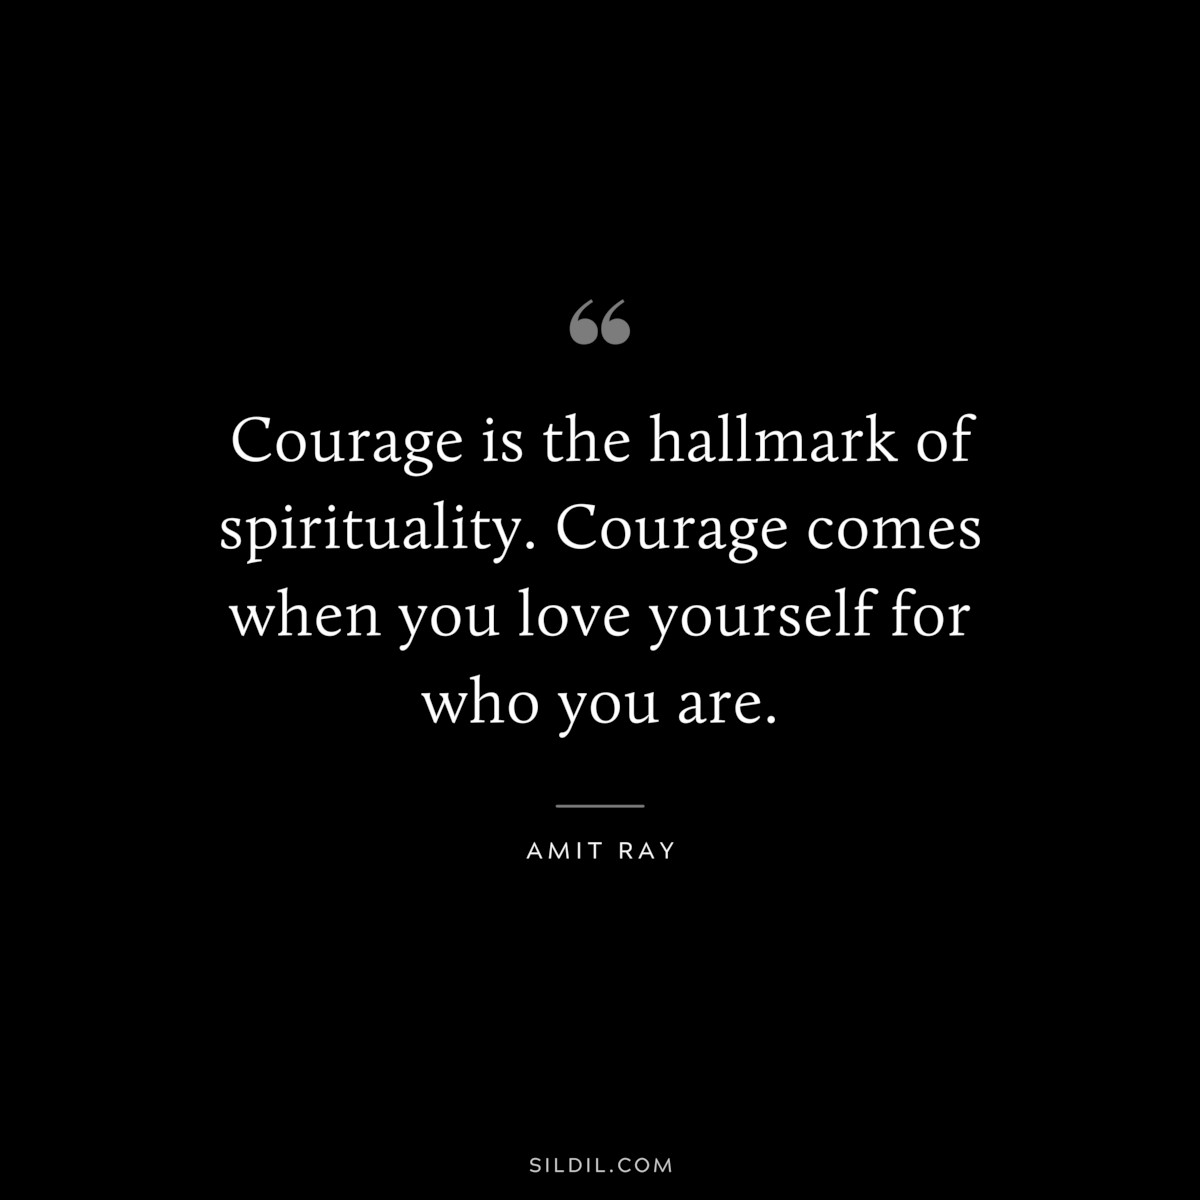 Courage is the hallmark of spirituality. Courage comes when you love yourself for who you are. ― Amit Ray